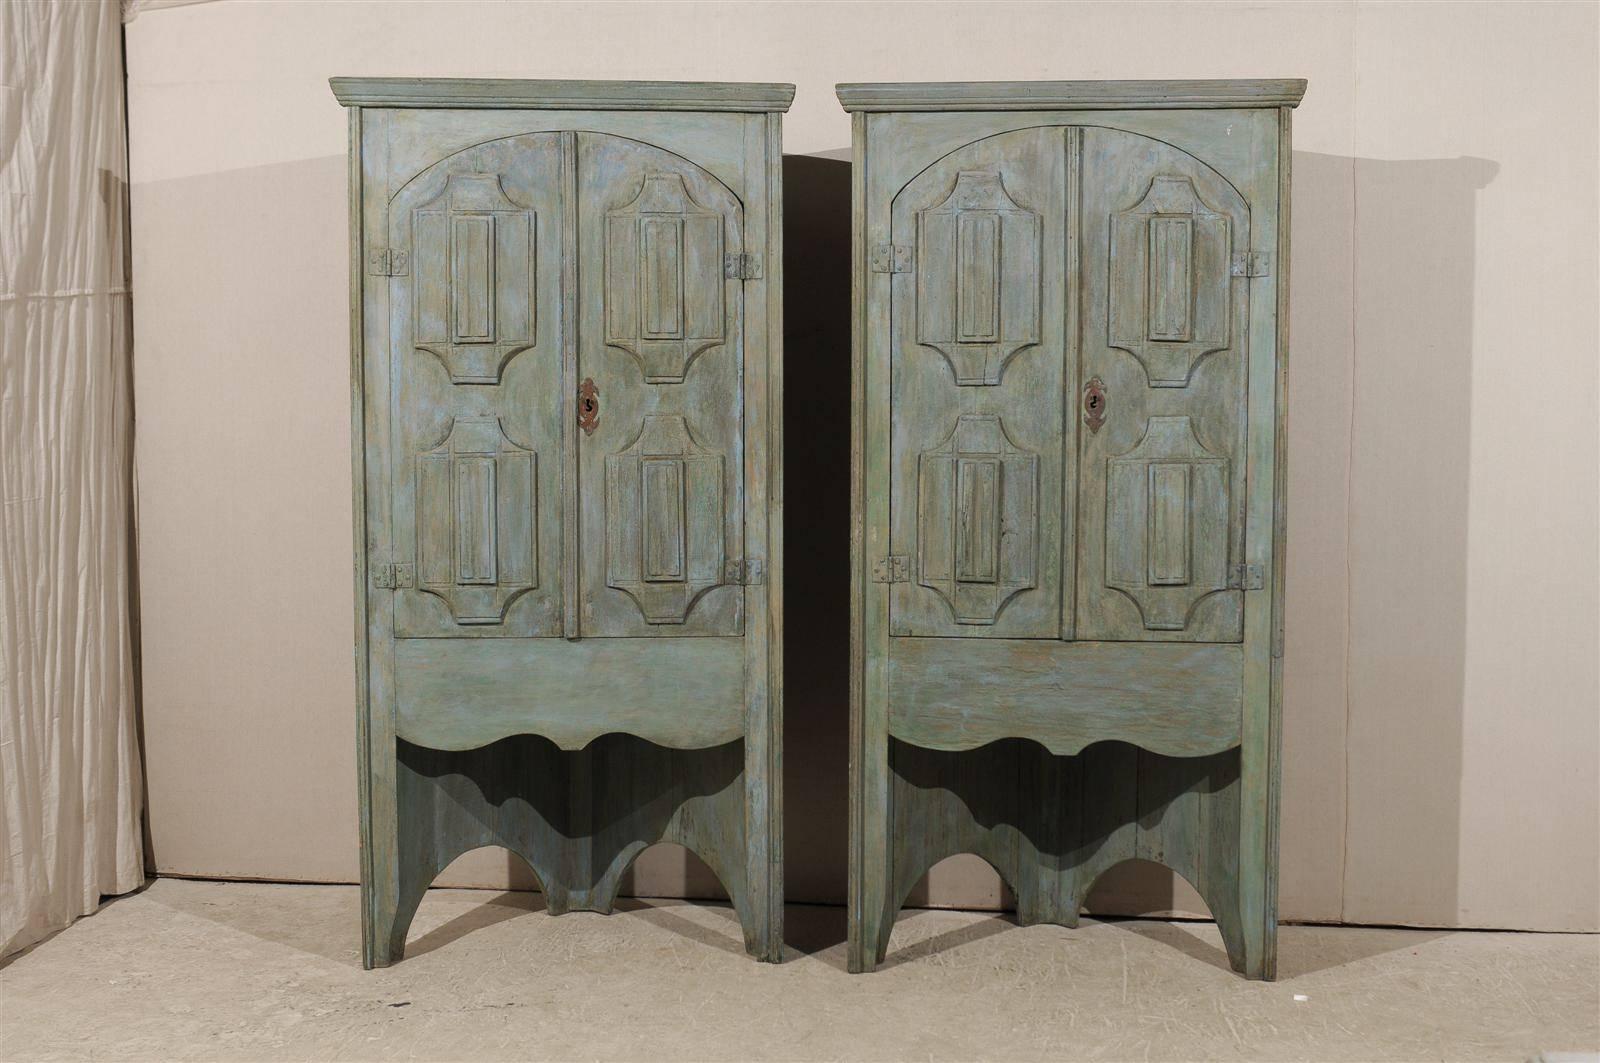 A pair of 19th century Brazilian painted wood tall corner cabinets with beautifully arched and decoratively paneled doors. This pair of antique corner cabinets from Brazil, nicely sized at approximately 7.5 feet in height, feature a pair of